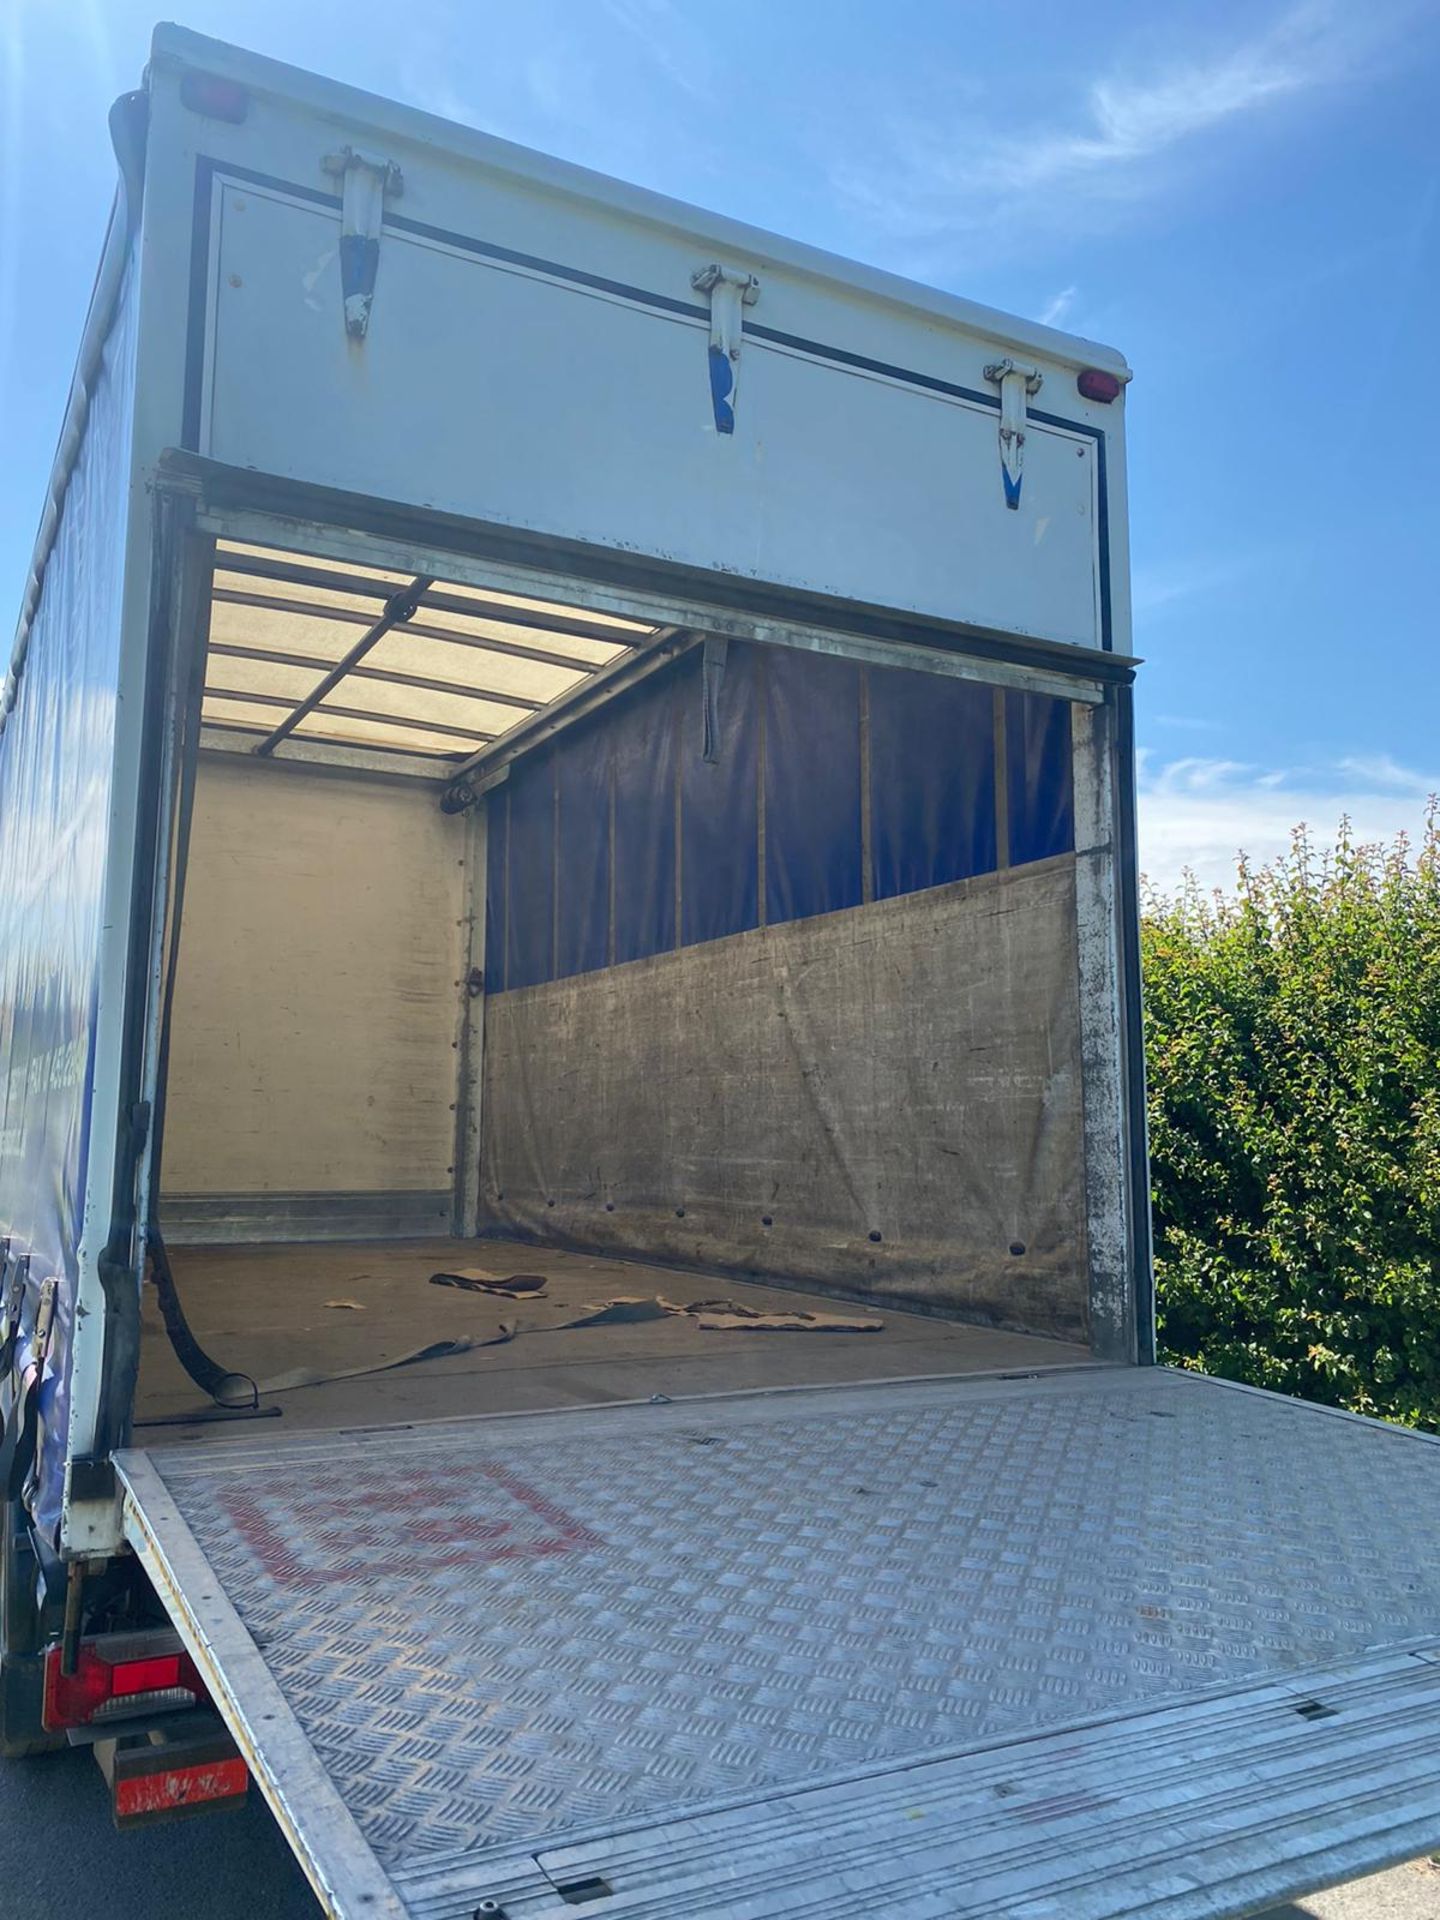 2014 IVECO 70C 17 CURTAINSIDER TRUCK .LOCATION NORTH YORKSHIRE. - Image 2 of 6